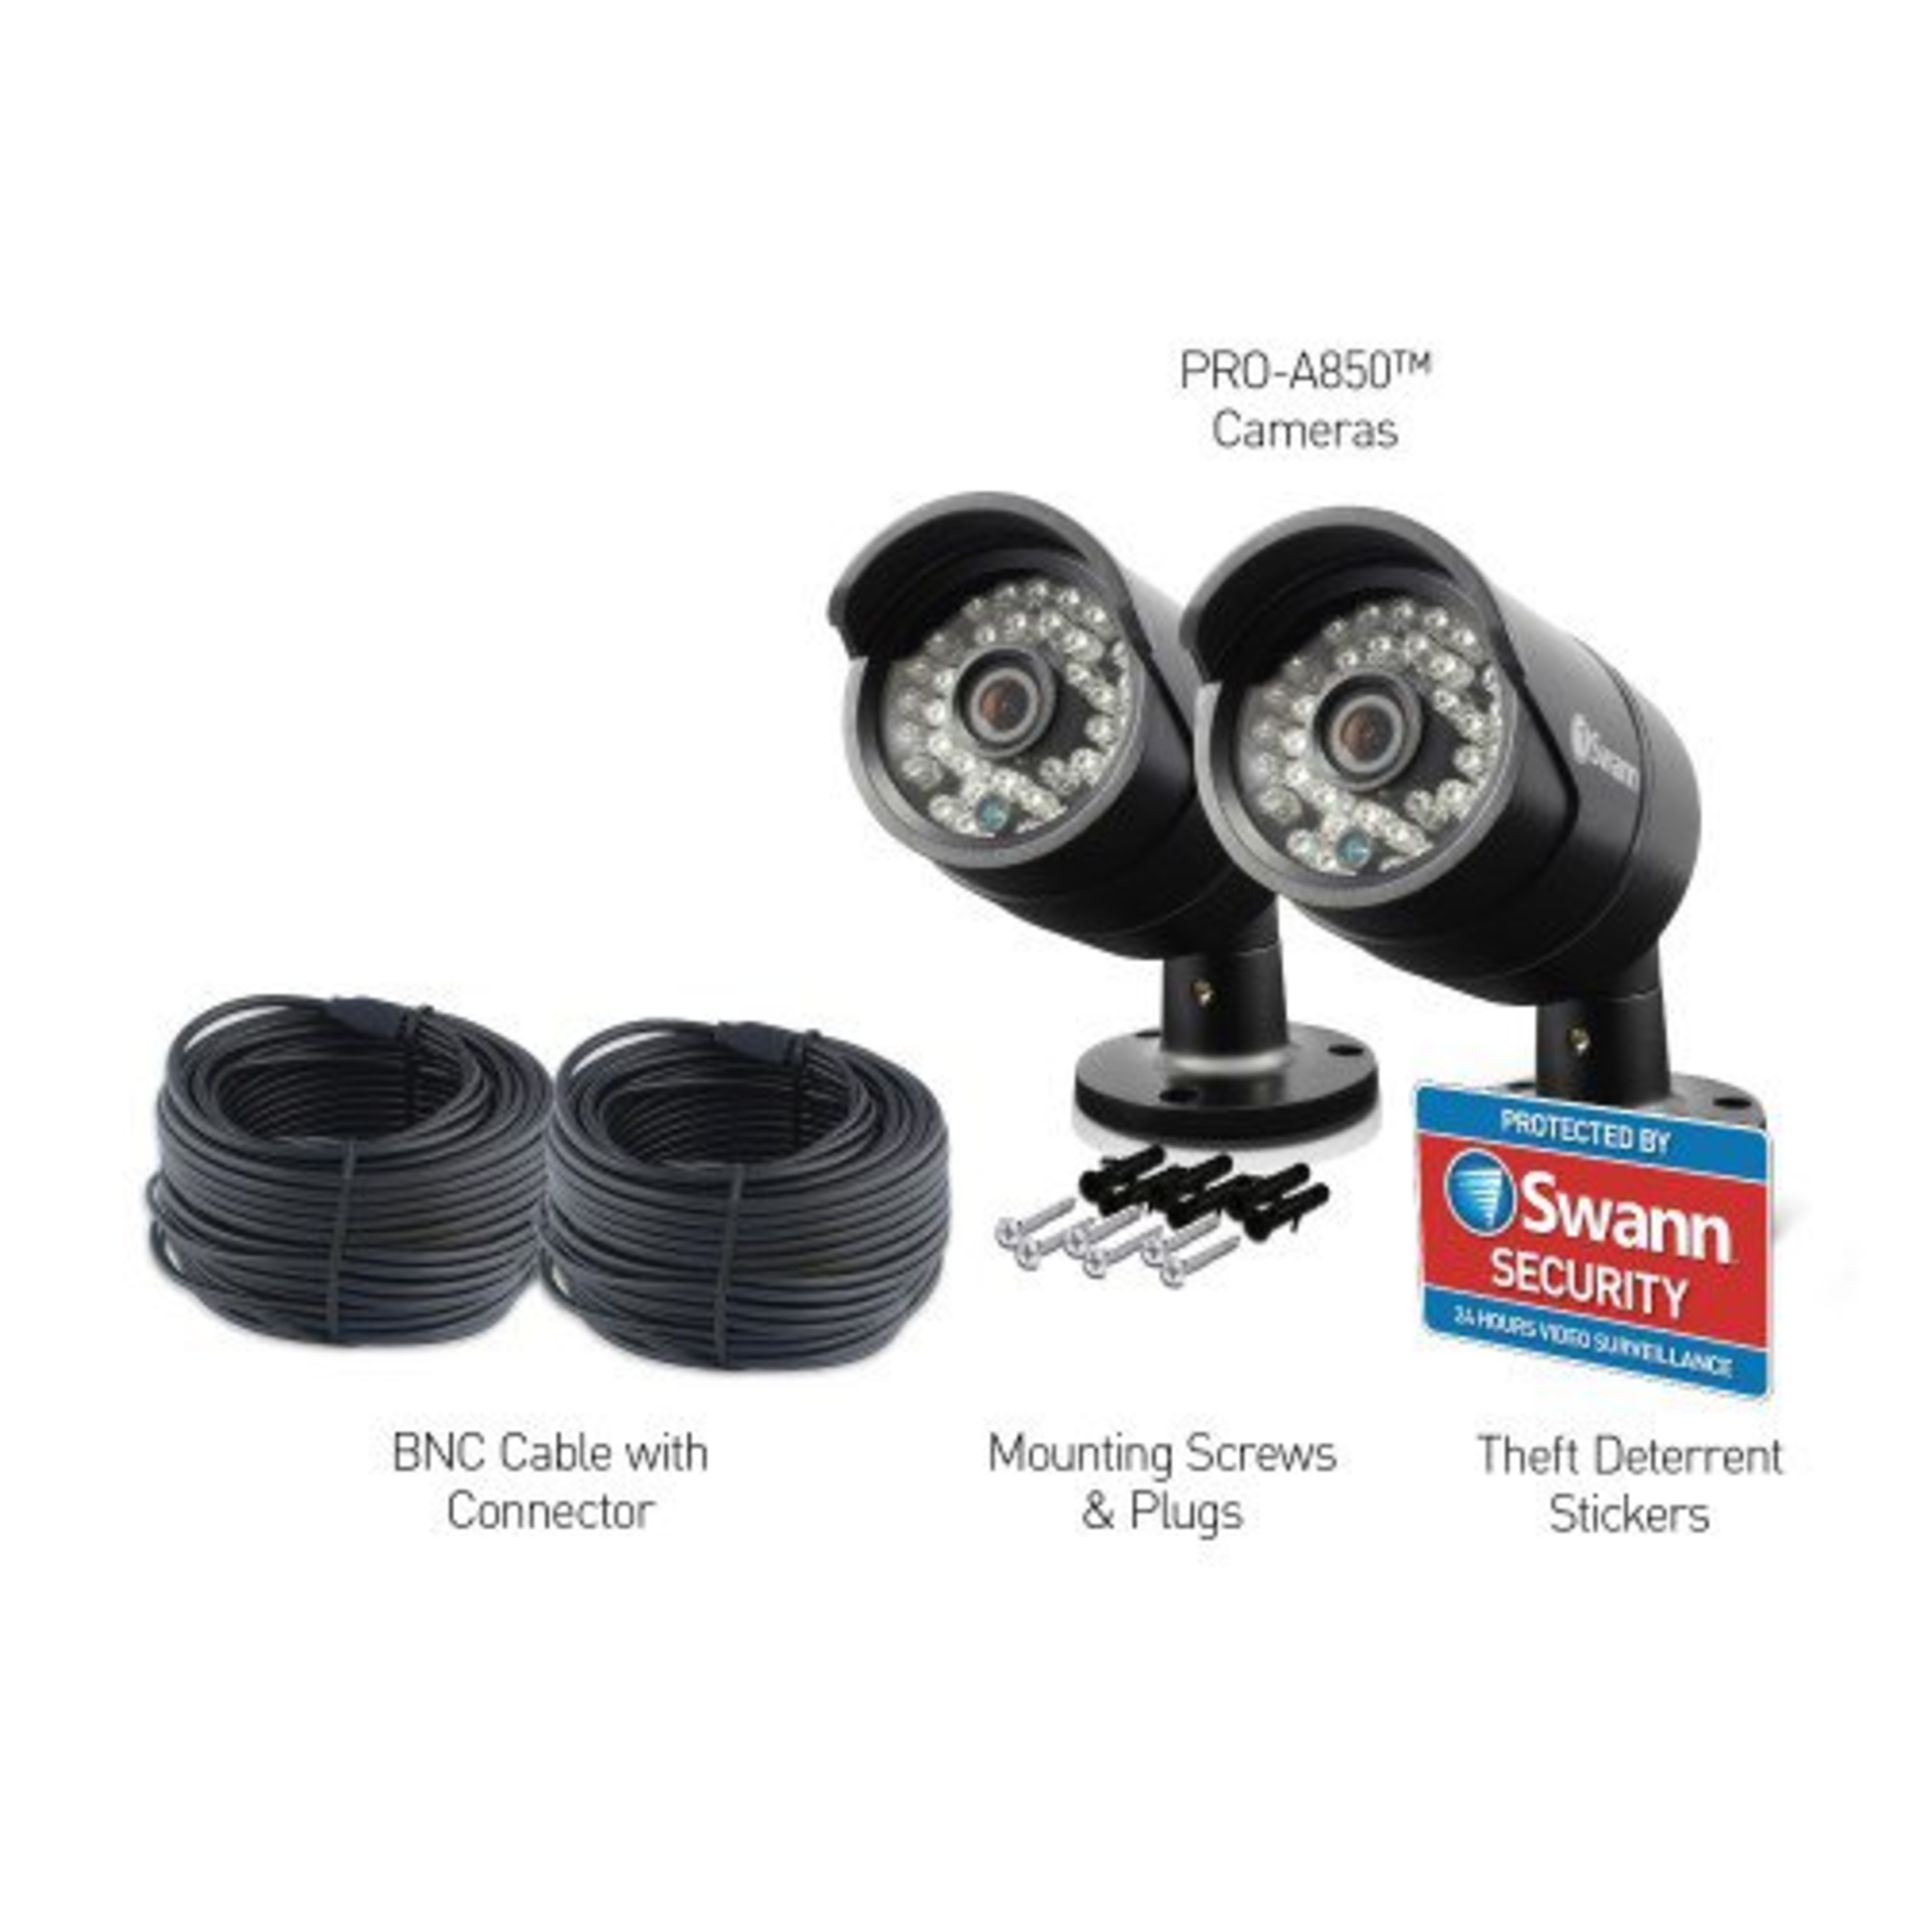 V *TRADE QTY* Grade A Swann H850 PK2 720p Security Camera - 30 Meter Night Vision - Weather Proof